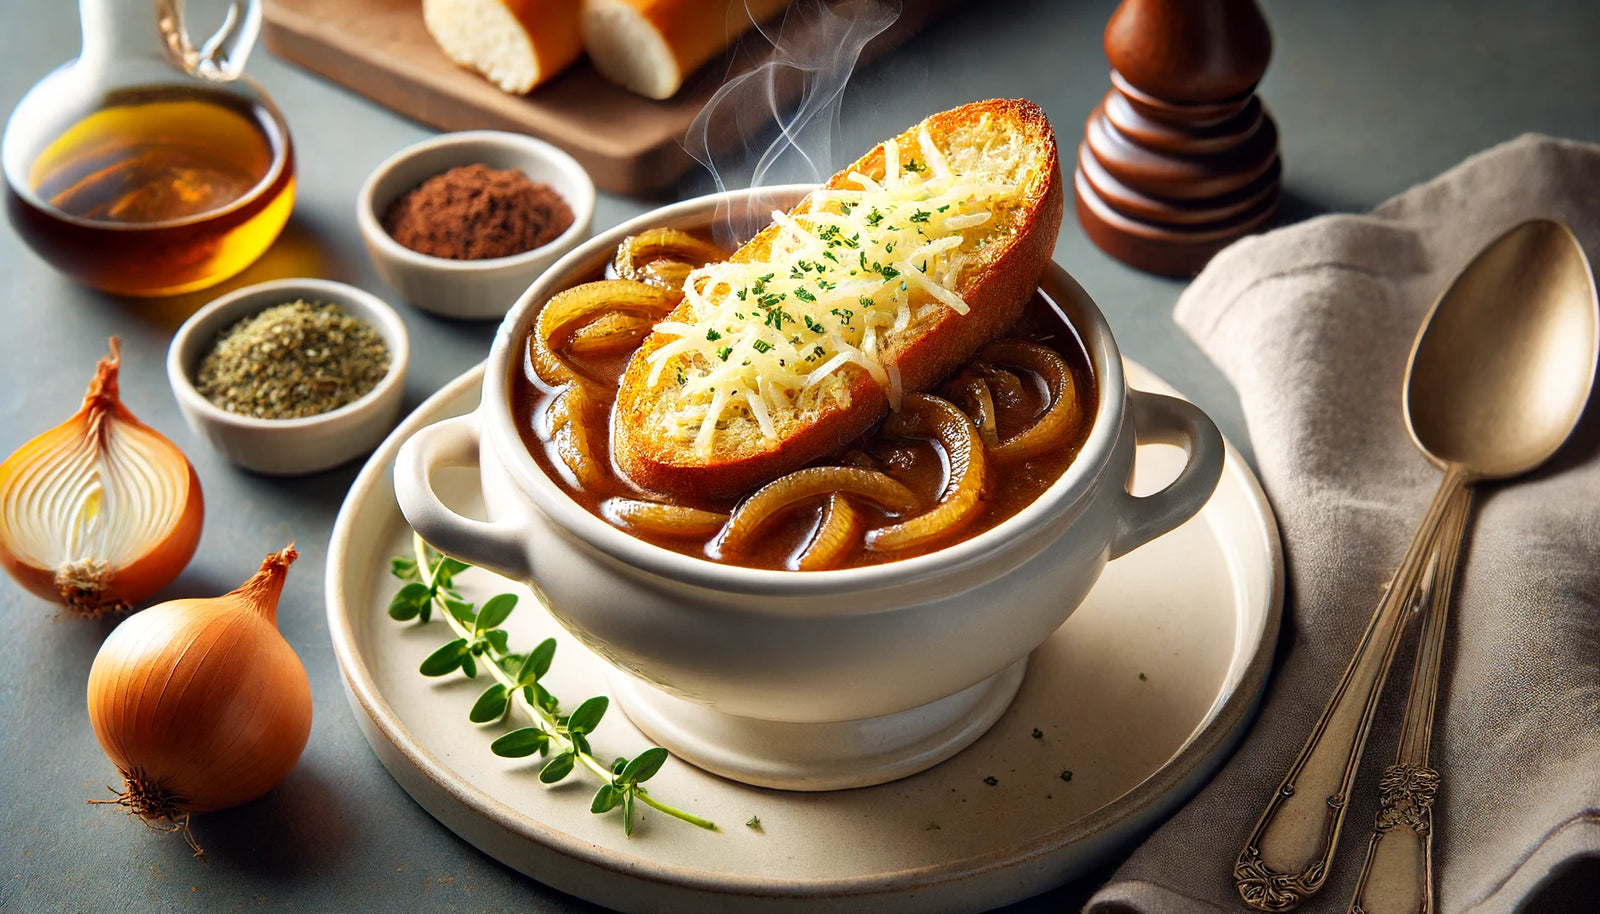 Ultimate Arteflame Grilled French Onion Soup